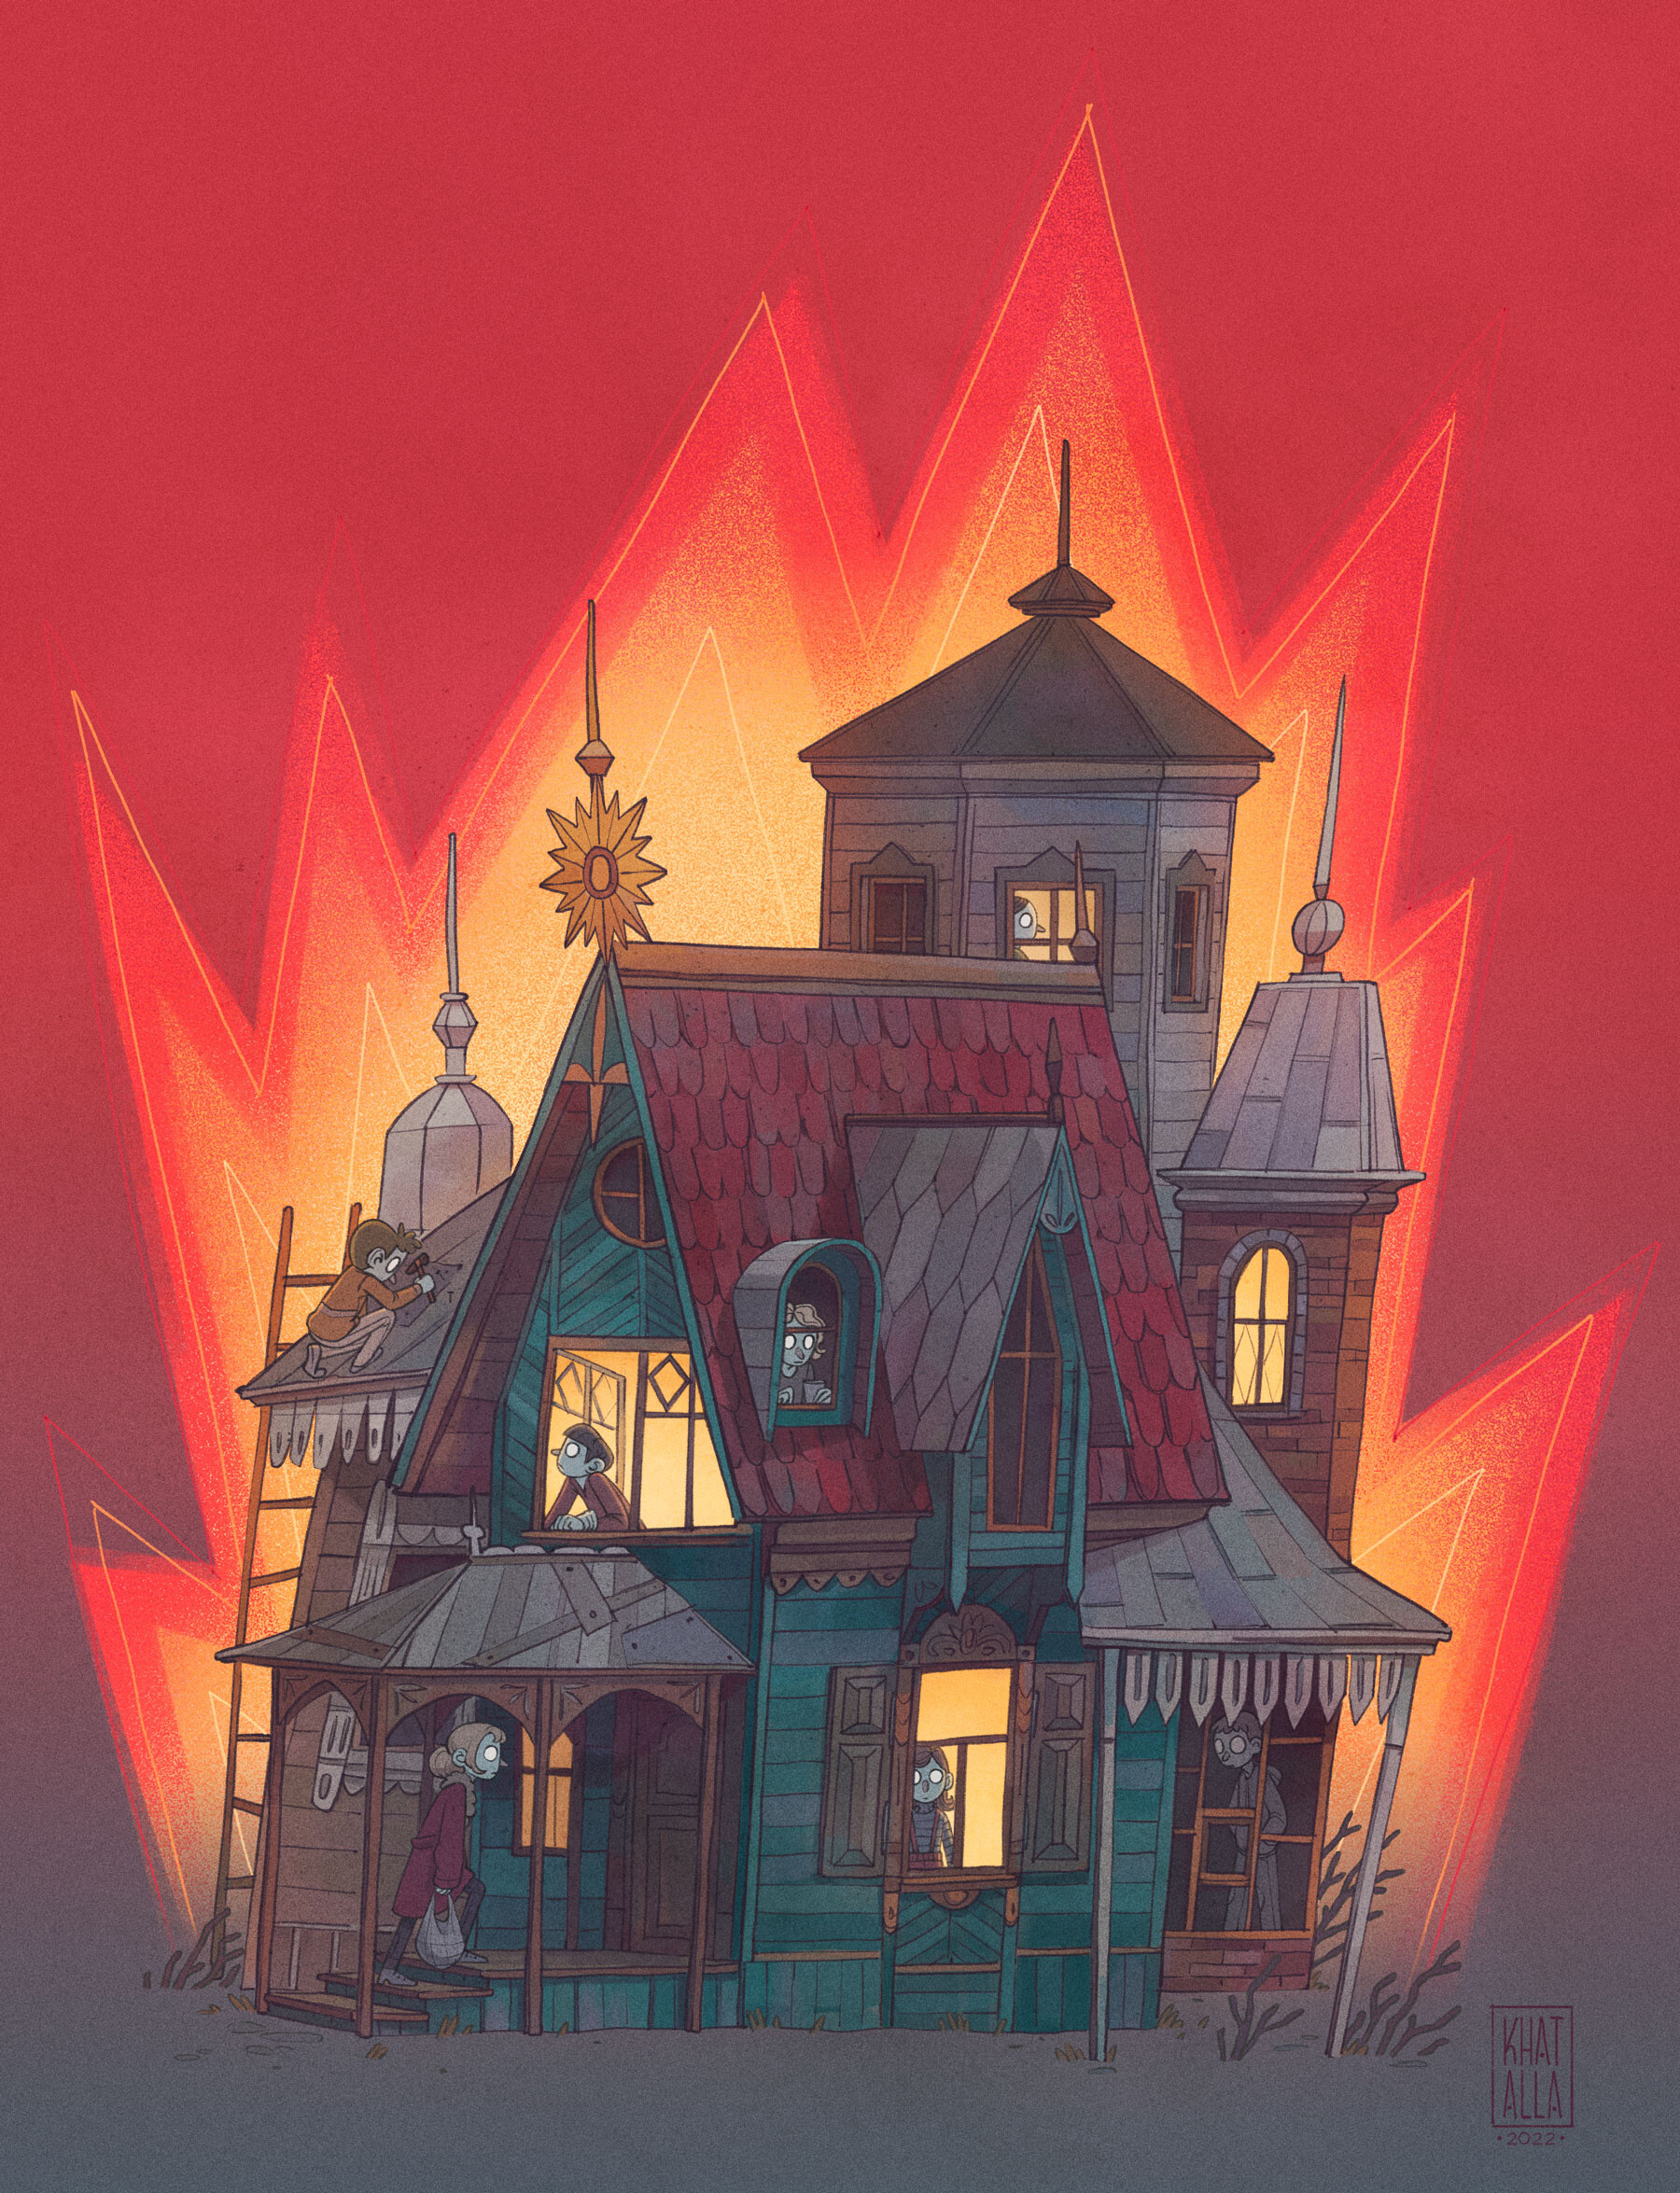 ArtStation - house on fire (illustration and 2d animation)